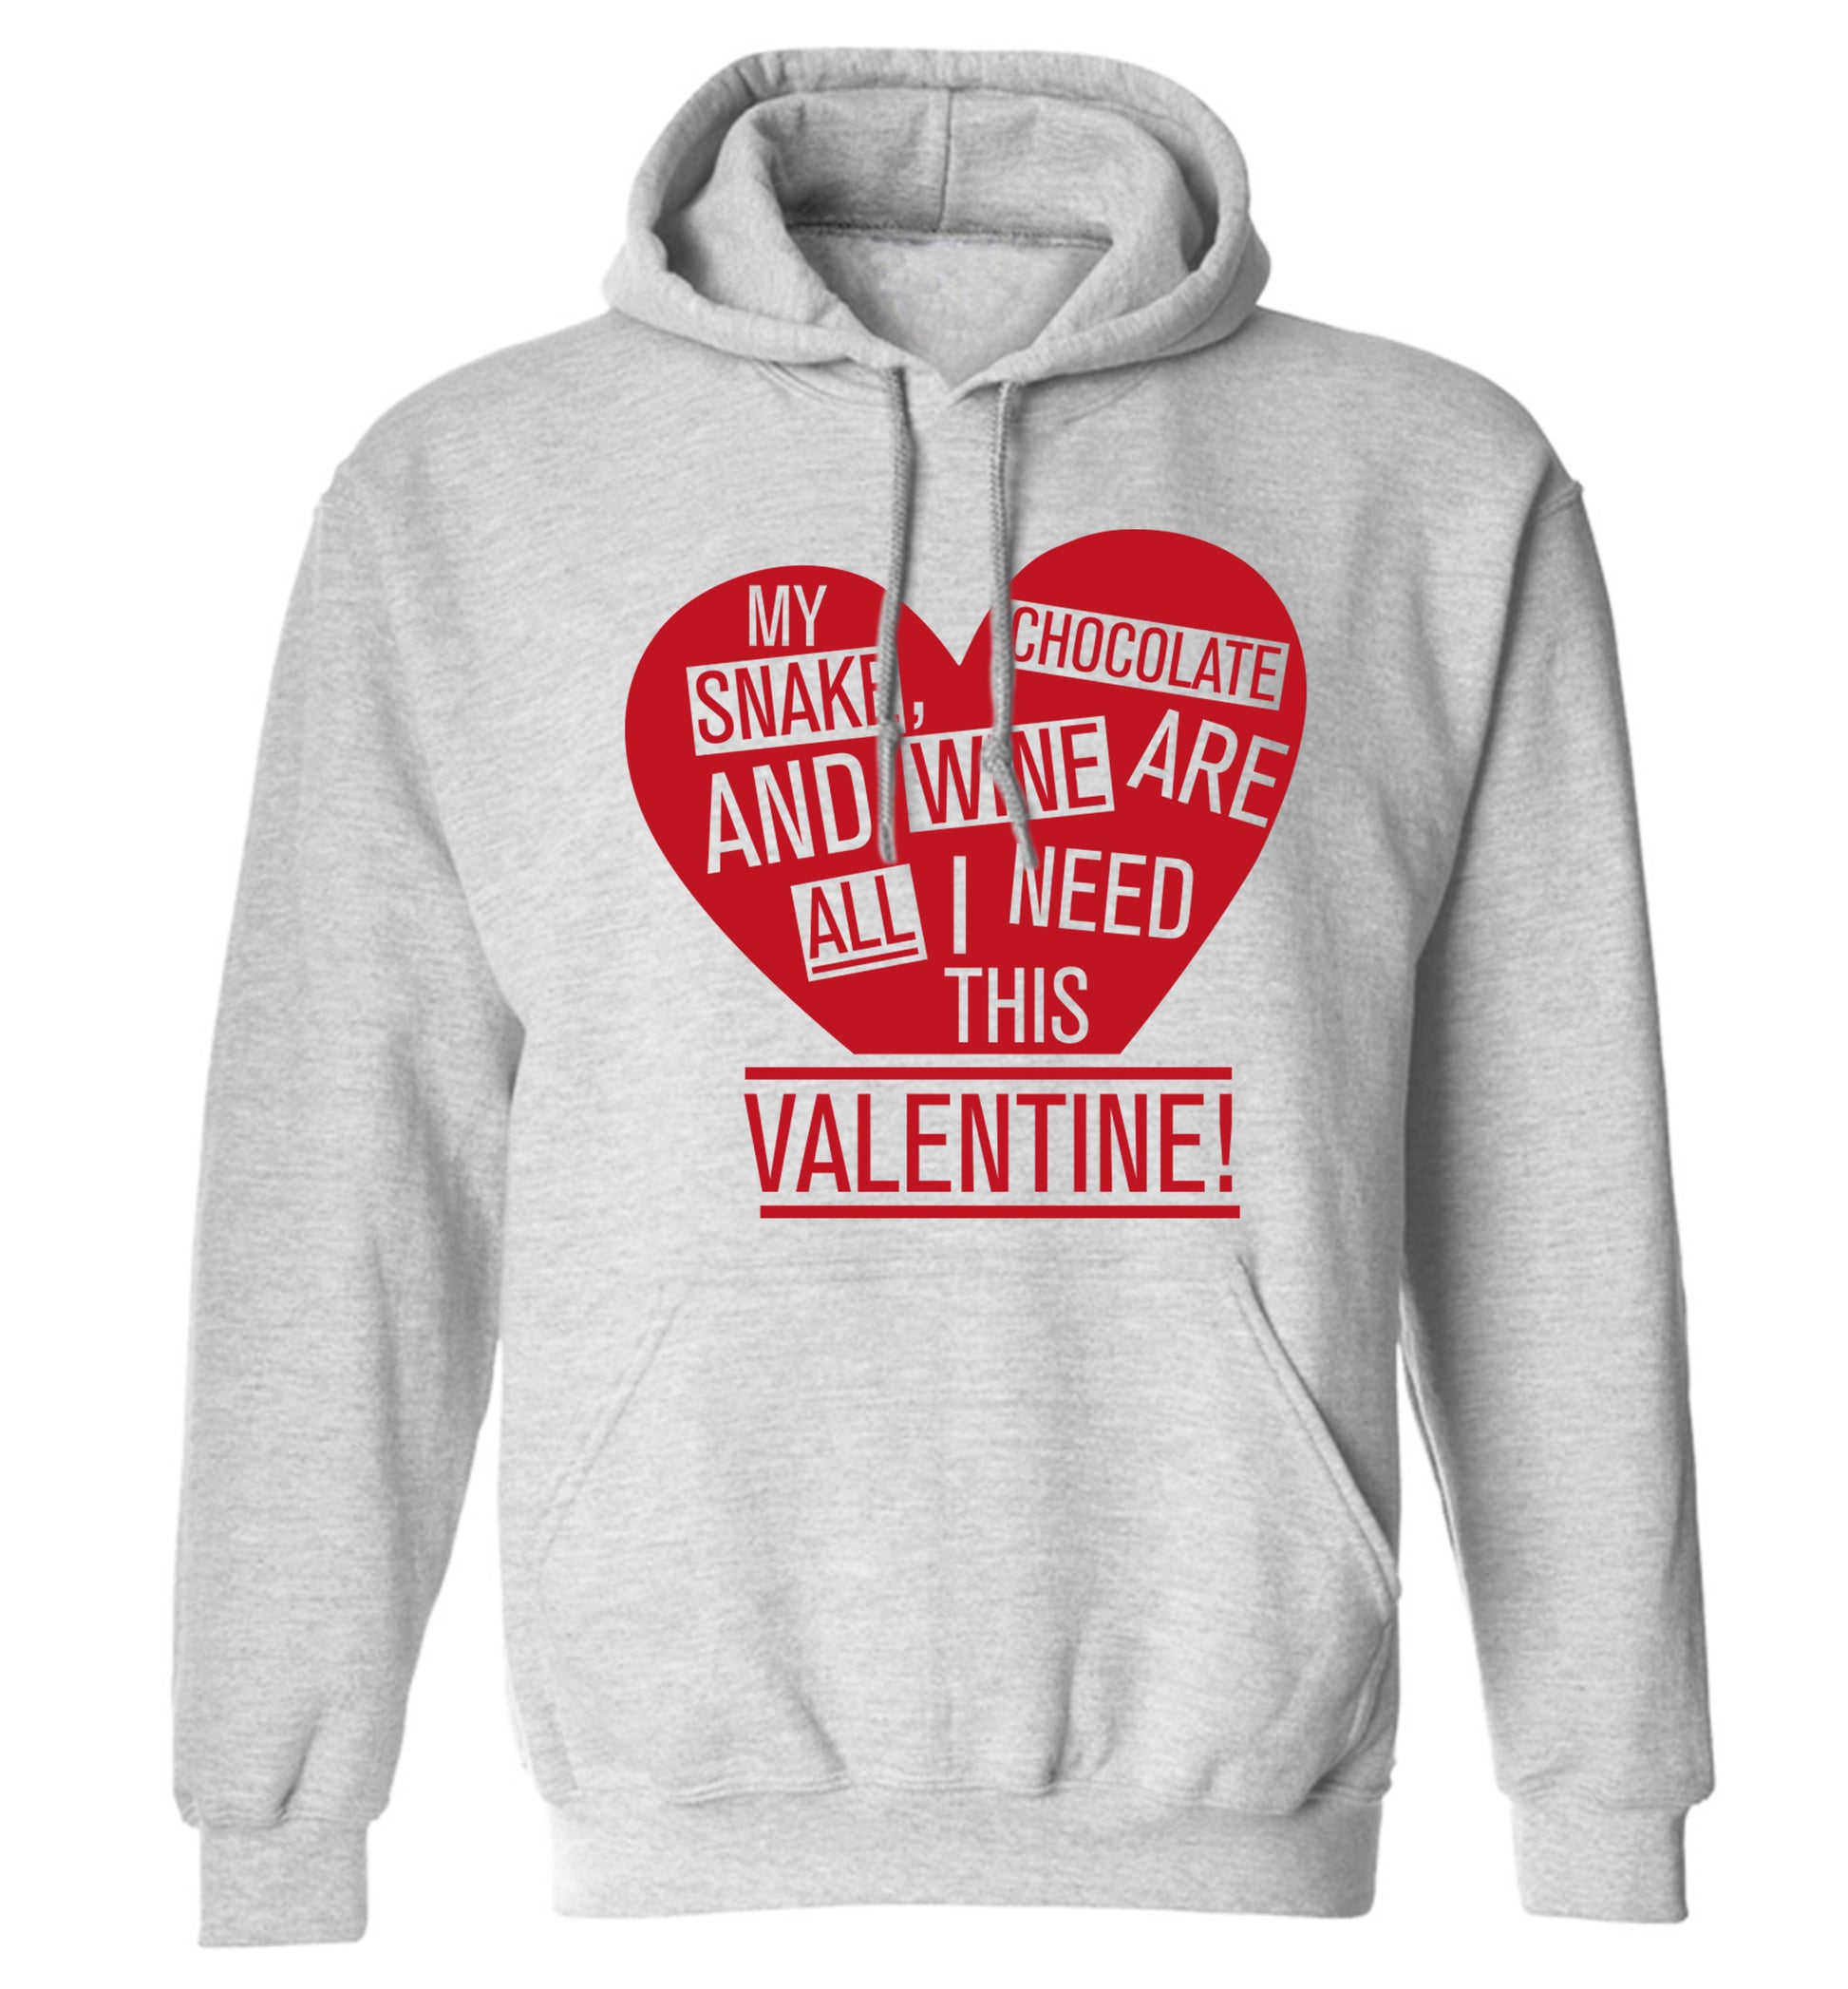 My snake, chocolate and wine are all I need this valentine! adults unisex grey hoodie 2XL